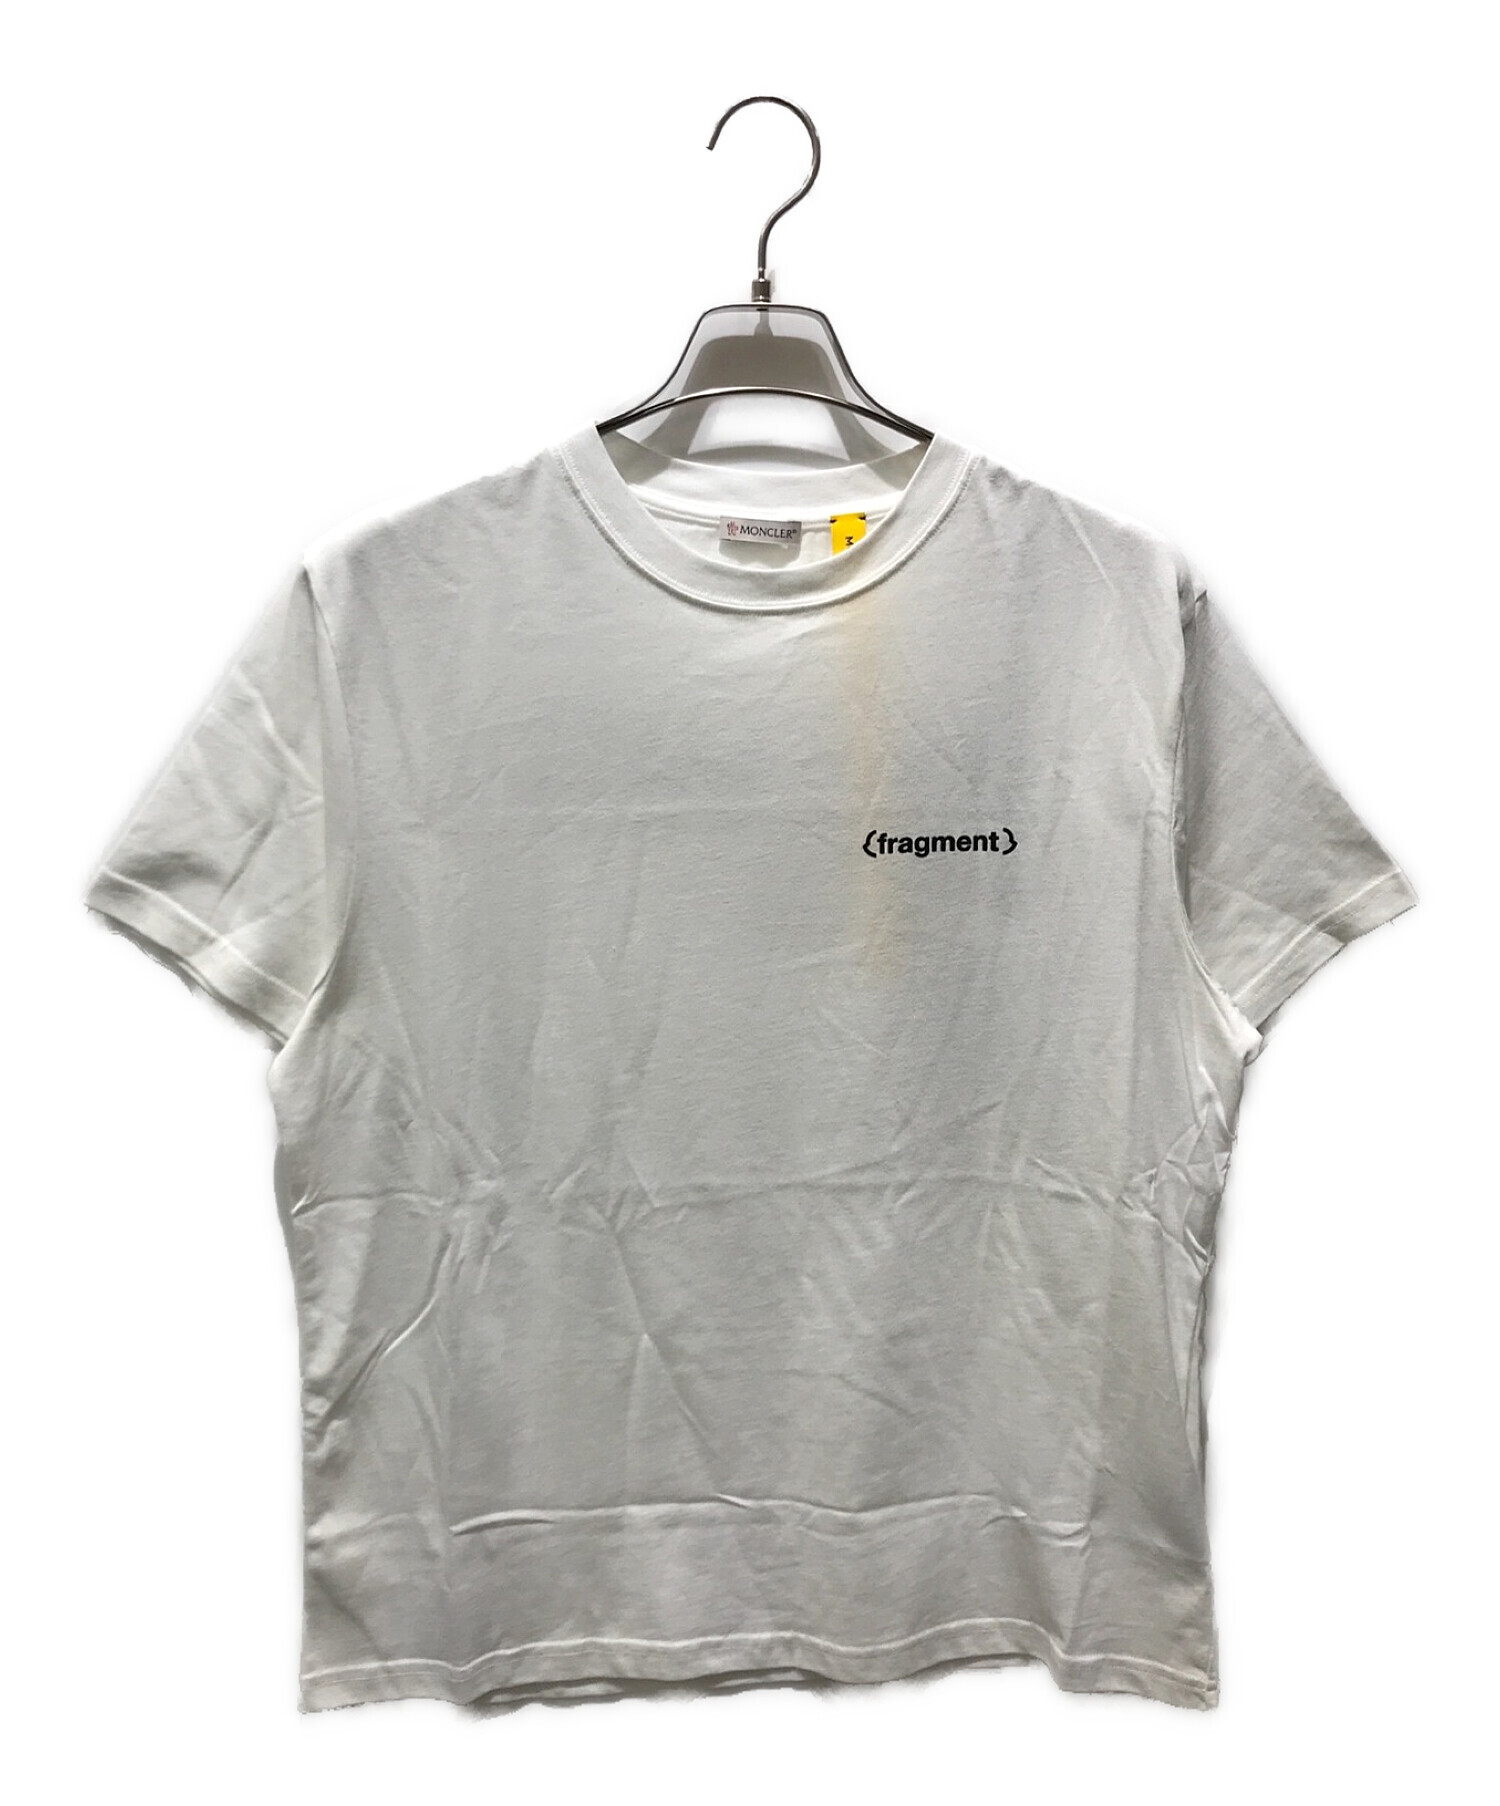 MONCLER fragment Tシャツ フラグメント モンクレール